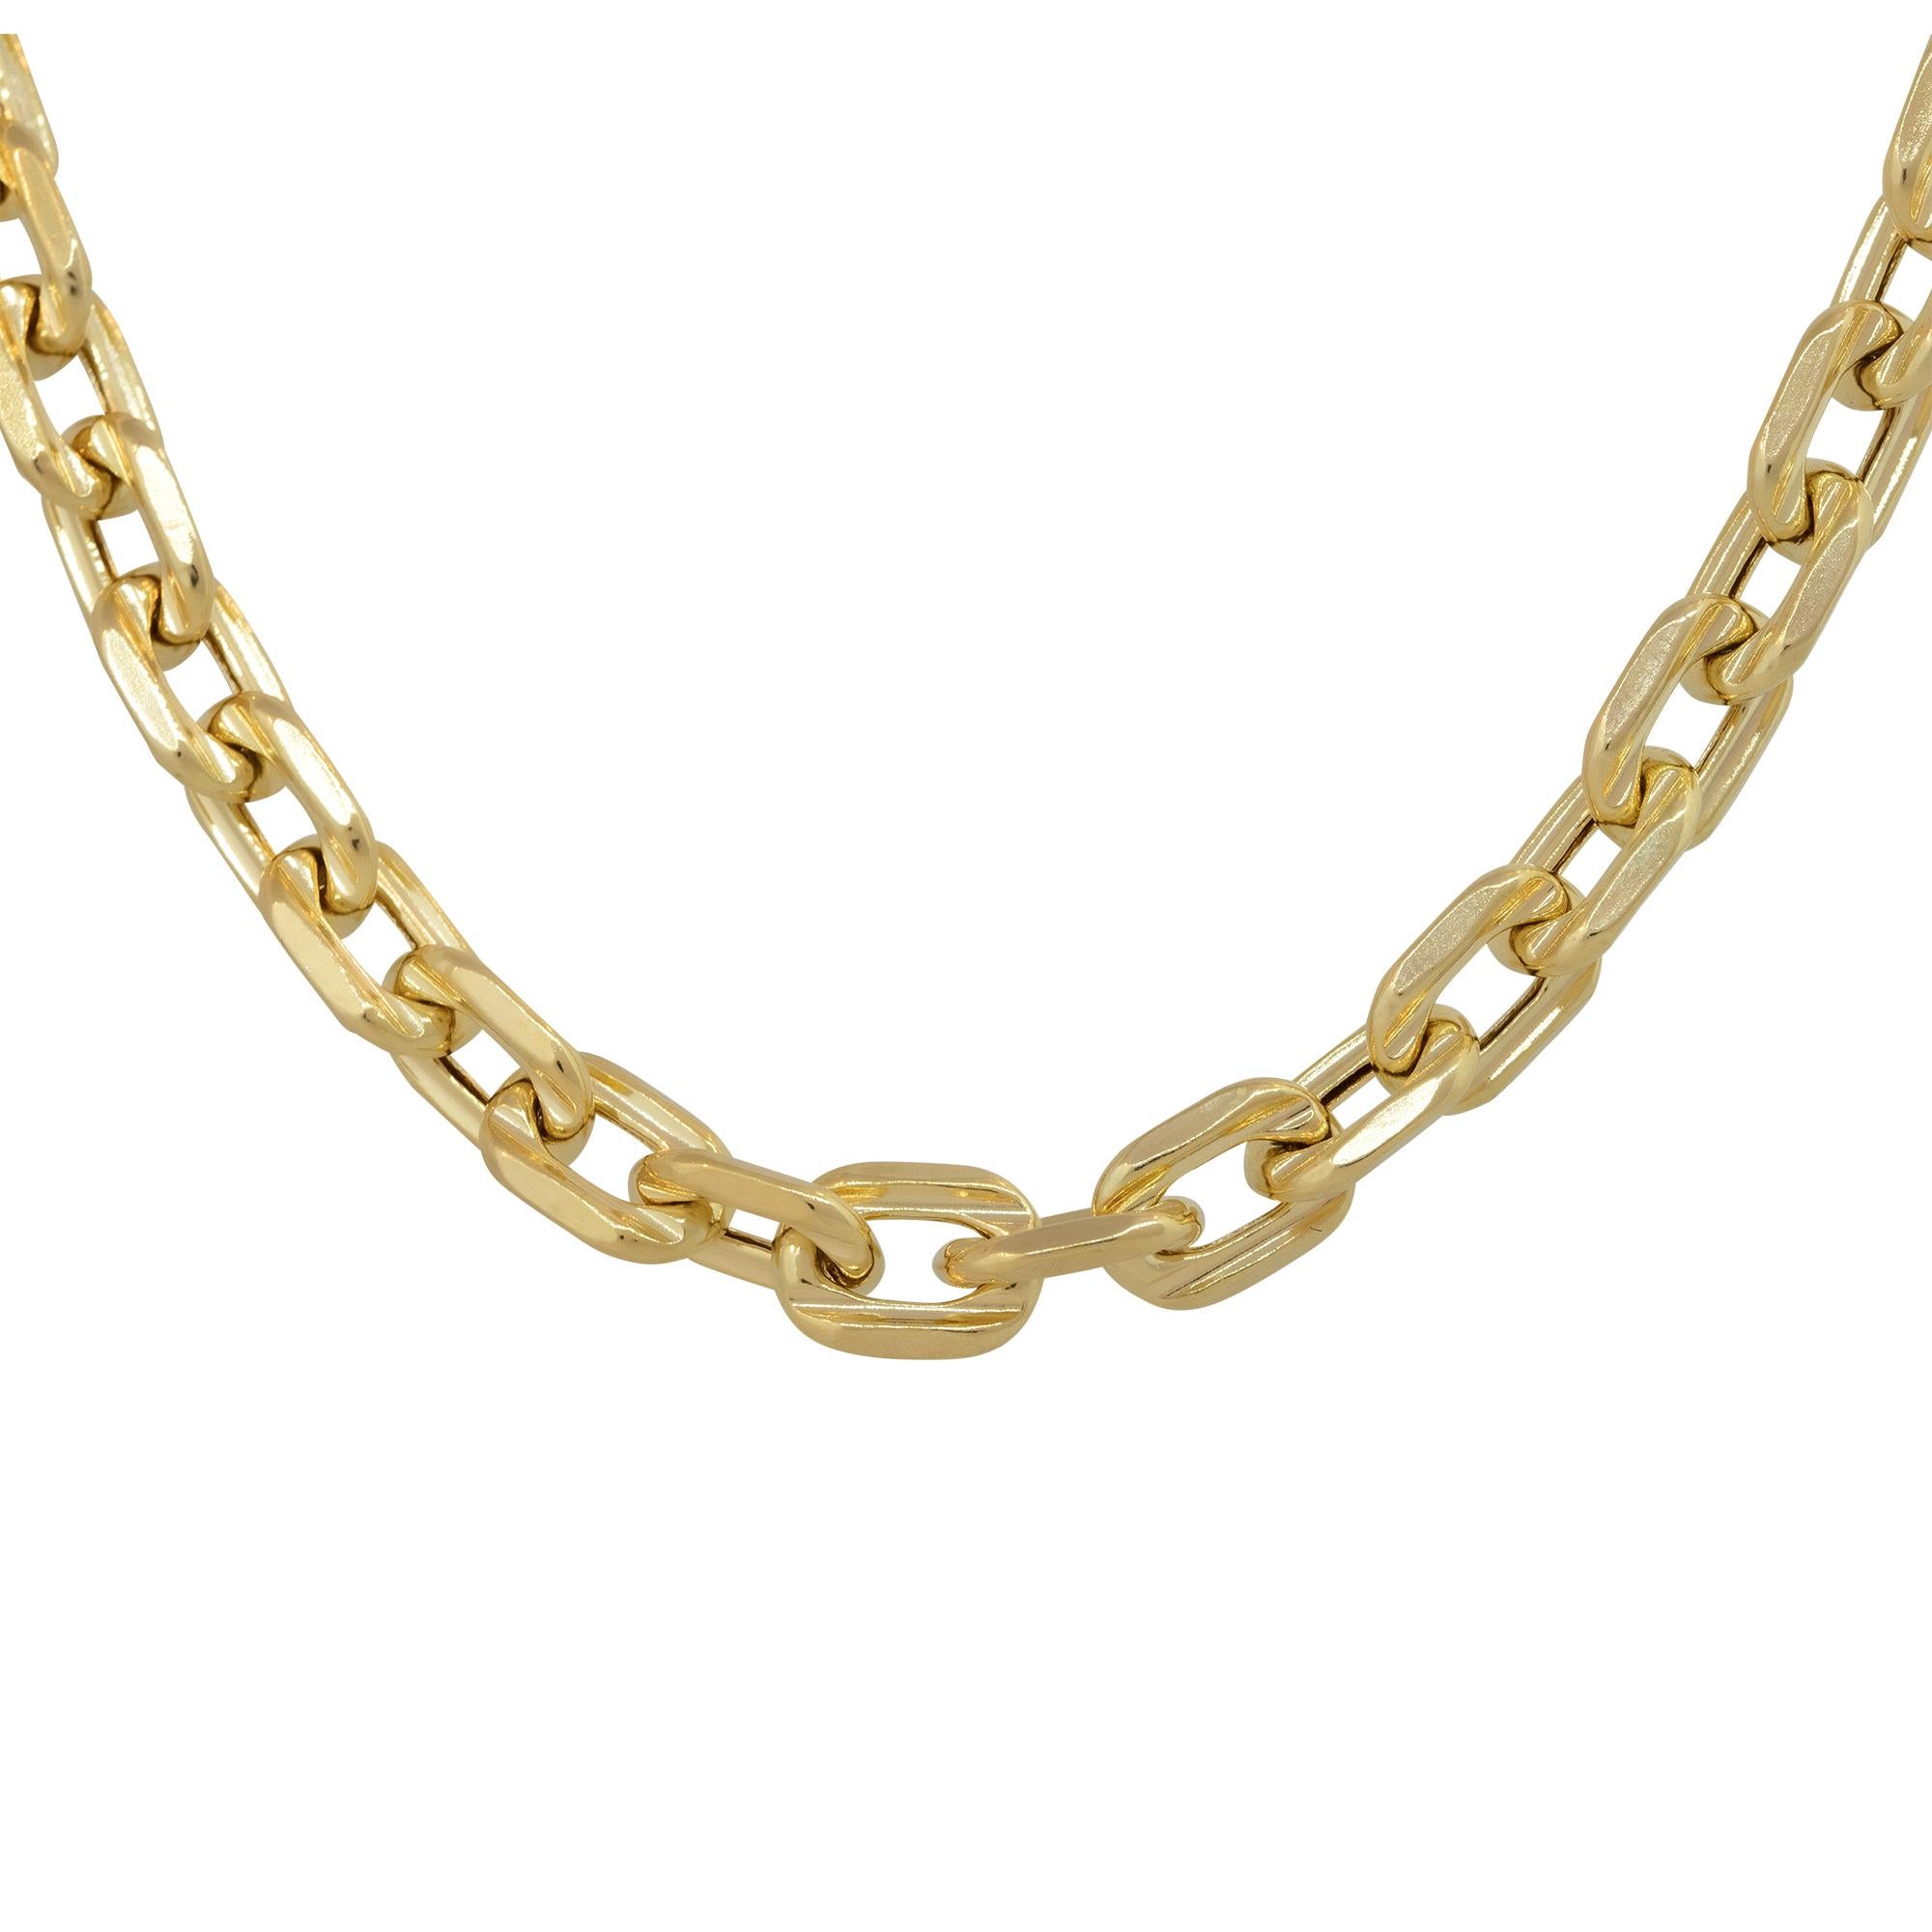 14k Yellow Gold 24″ Men's H-Link Chain

Material: 14k Yellow Gold
Measurements: Necklace Measures 24″ in Length and 6.9mm in Thickness
Fastening: Spring Ring Clasp
Item Weight: 27.7g (17.8dwt)
Additional Details: This item comes with a presentation